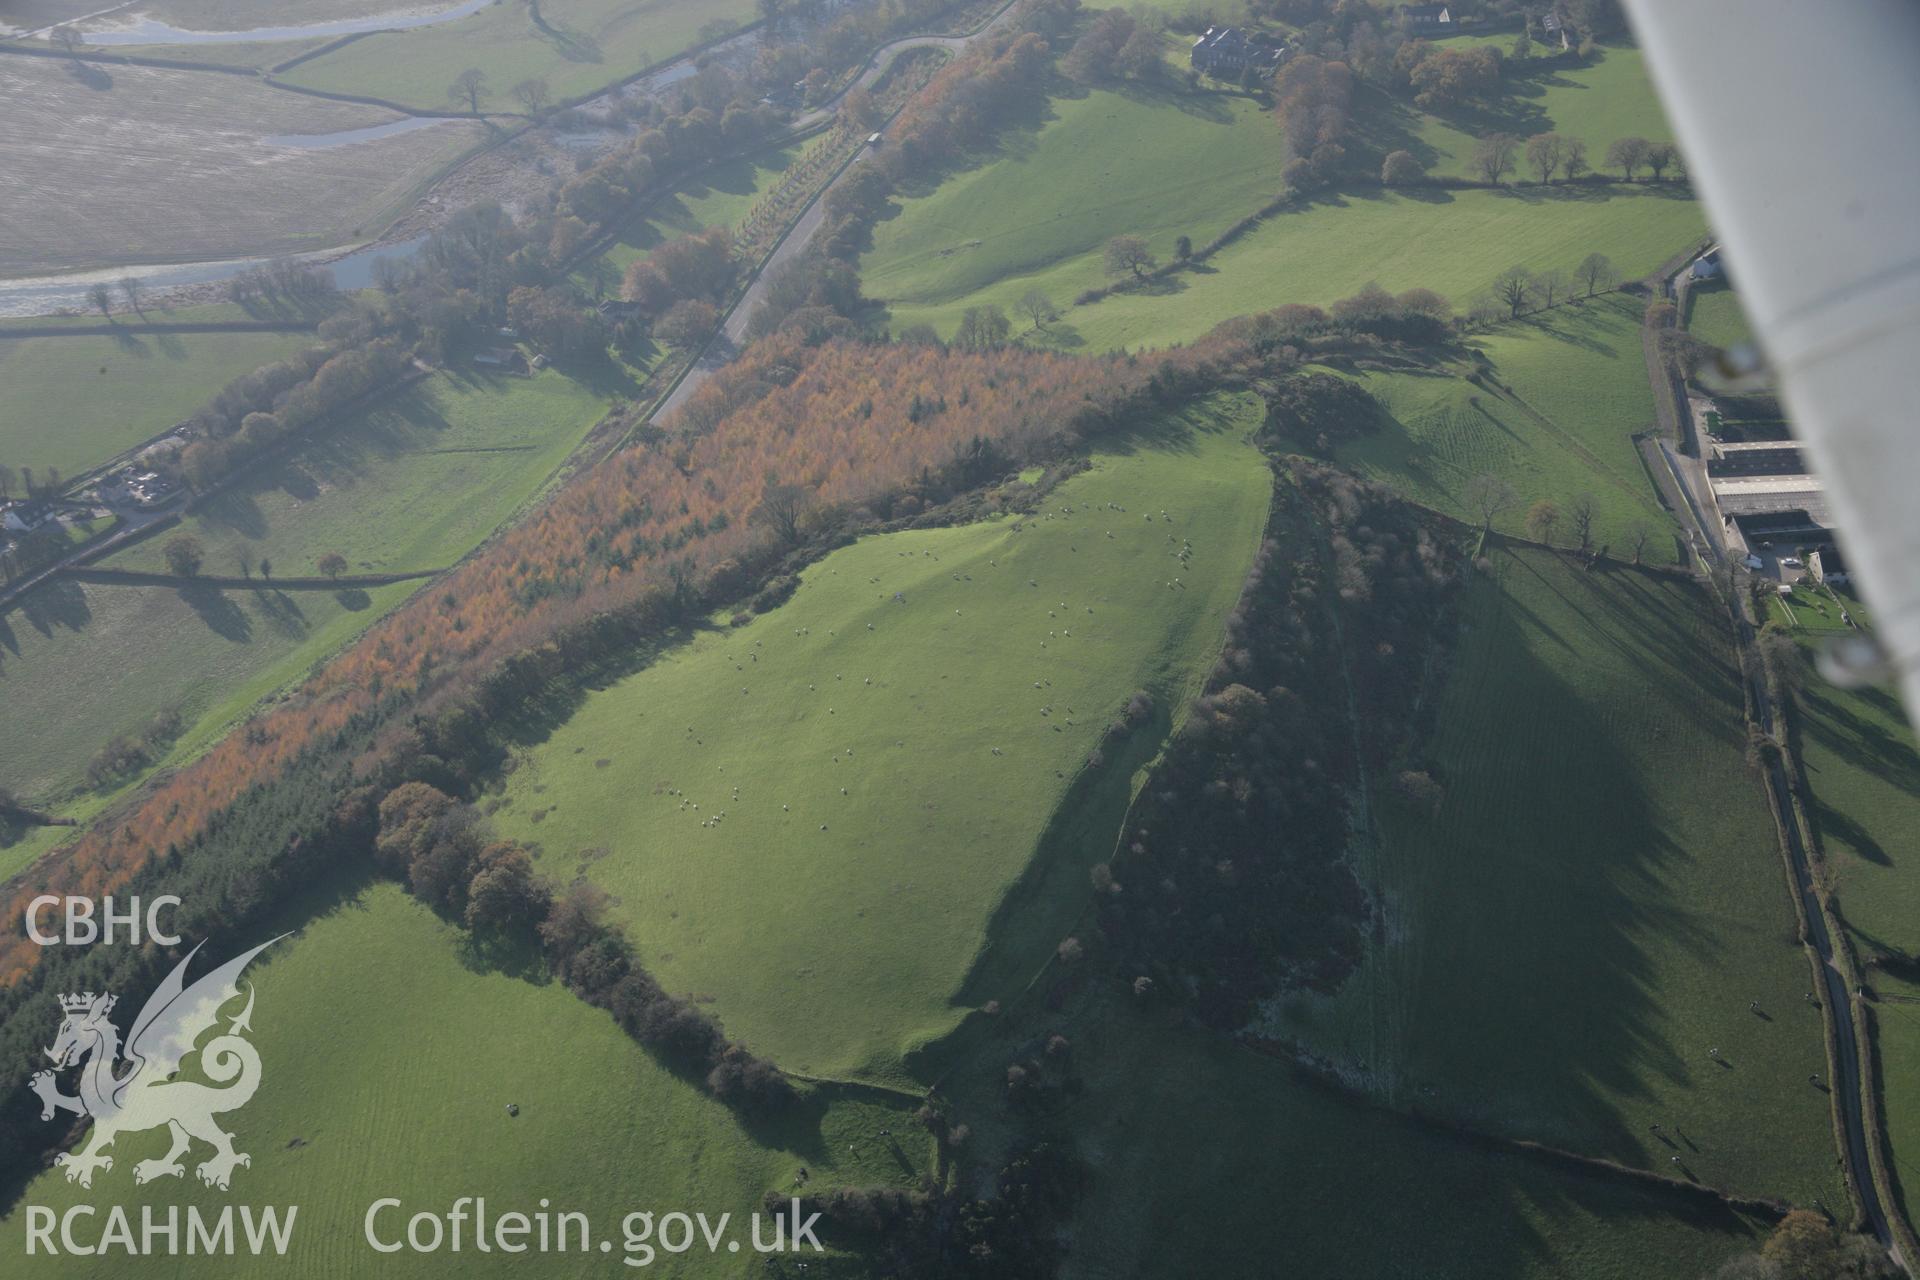 RCAHMW colour oblique photograph of Merlin's Hill, hillfort, view from north-east. Taken by Toby Driver on 17/11/2005.